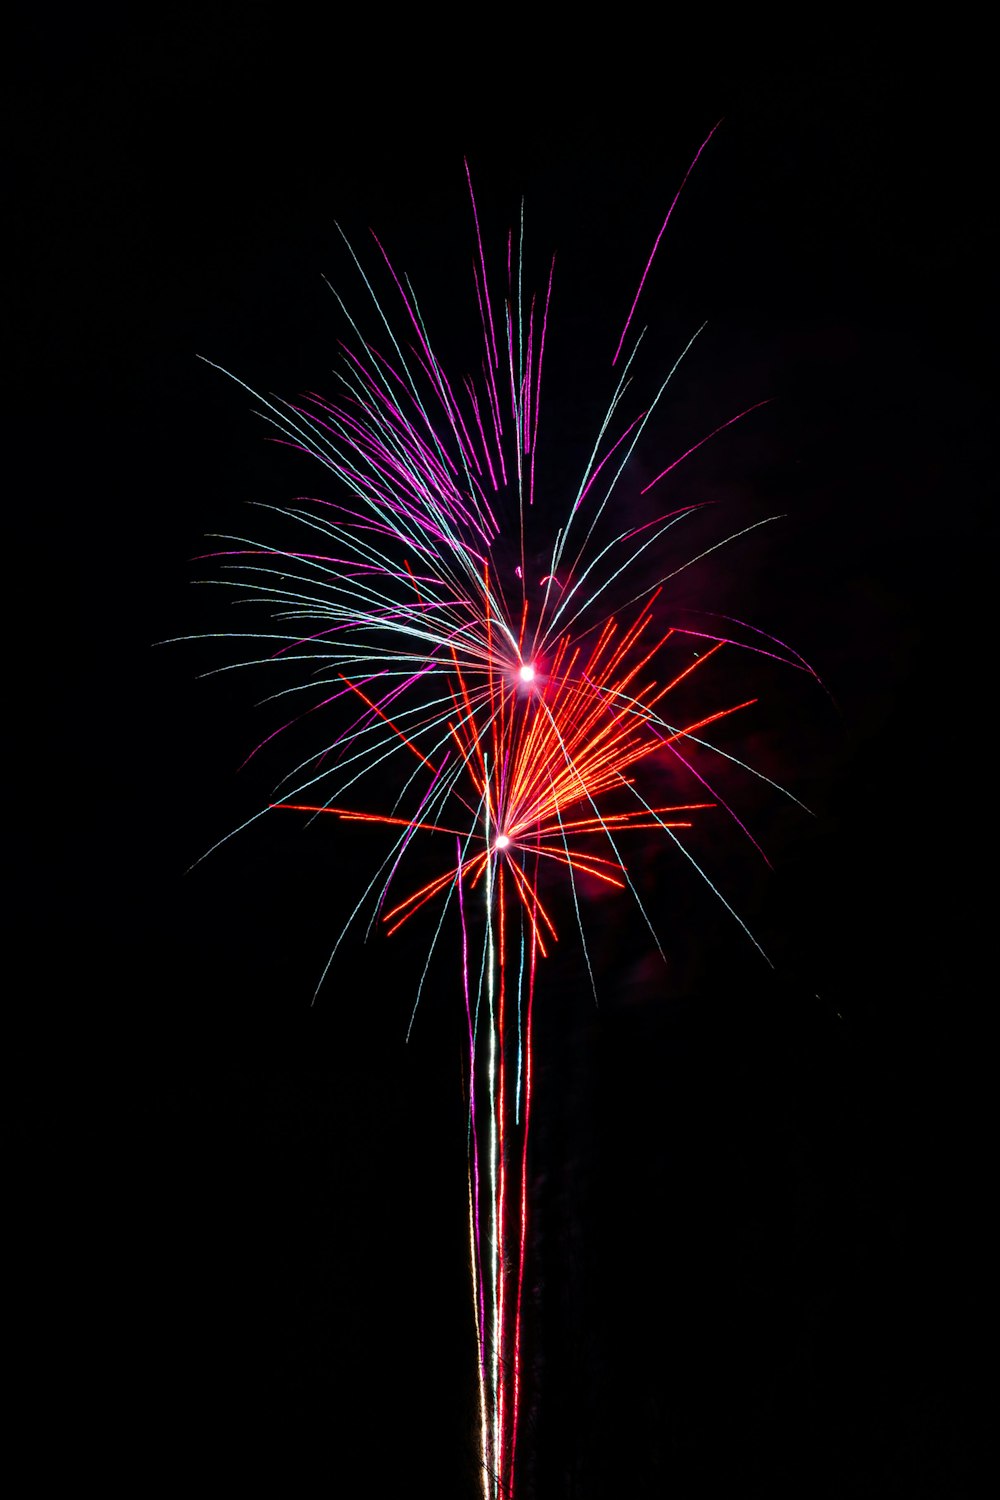 a colorful fireworks display in the dark sky